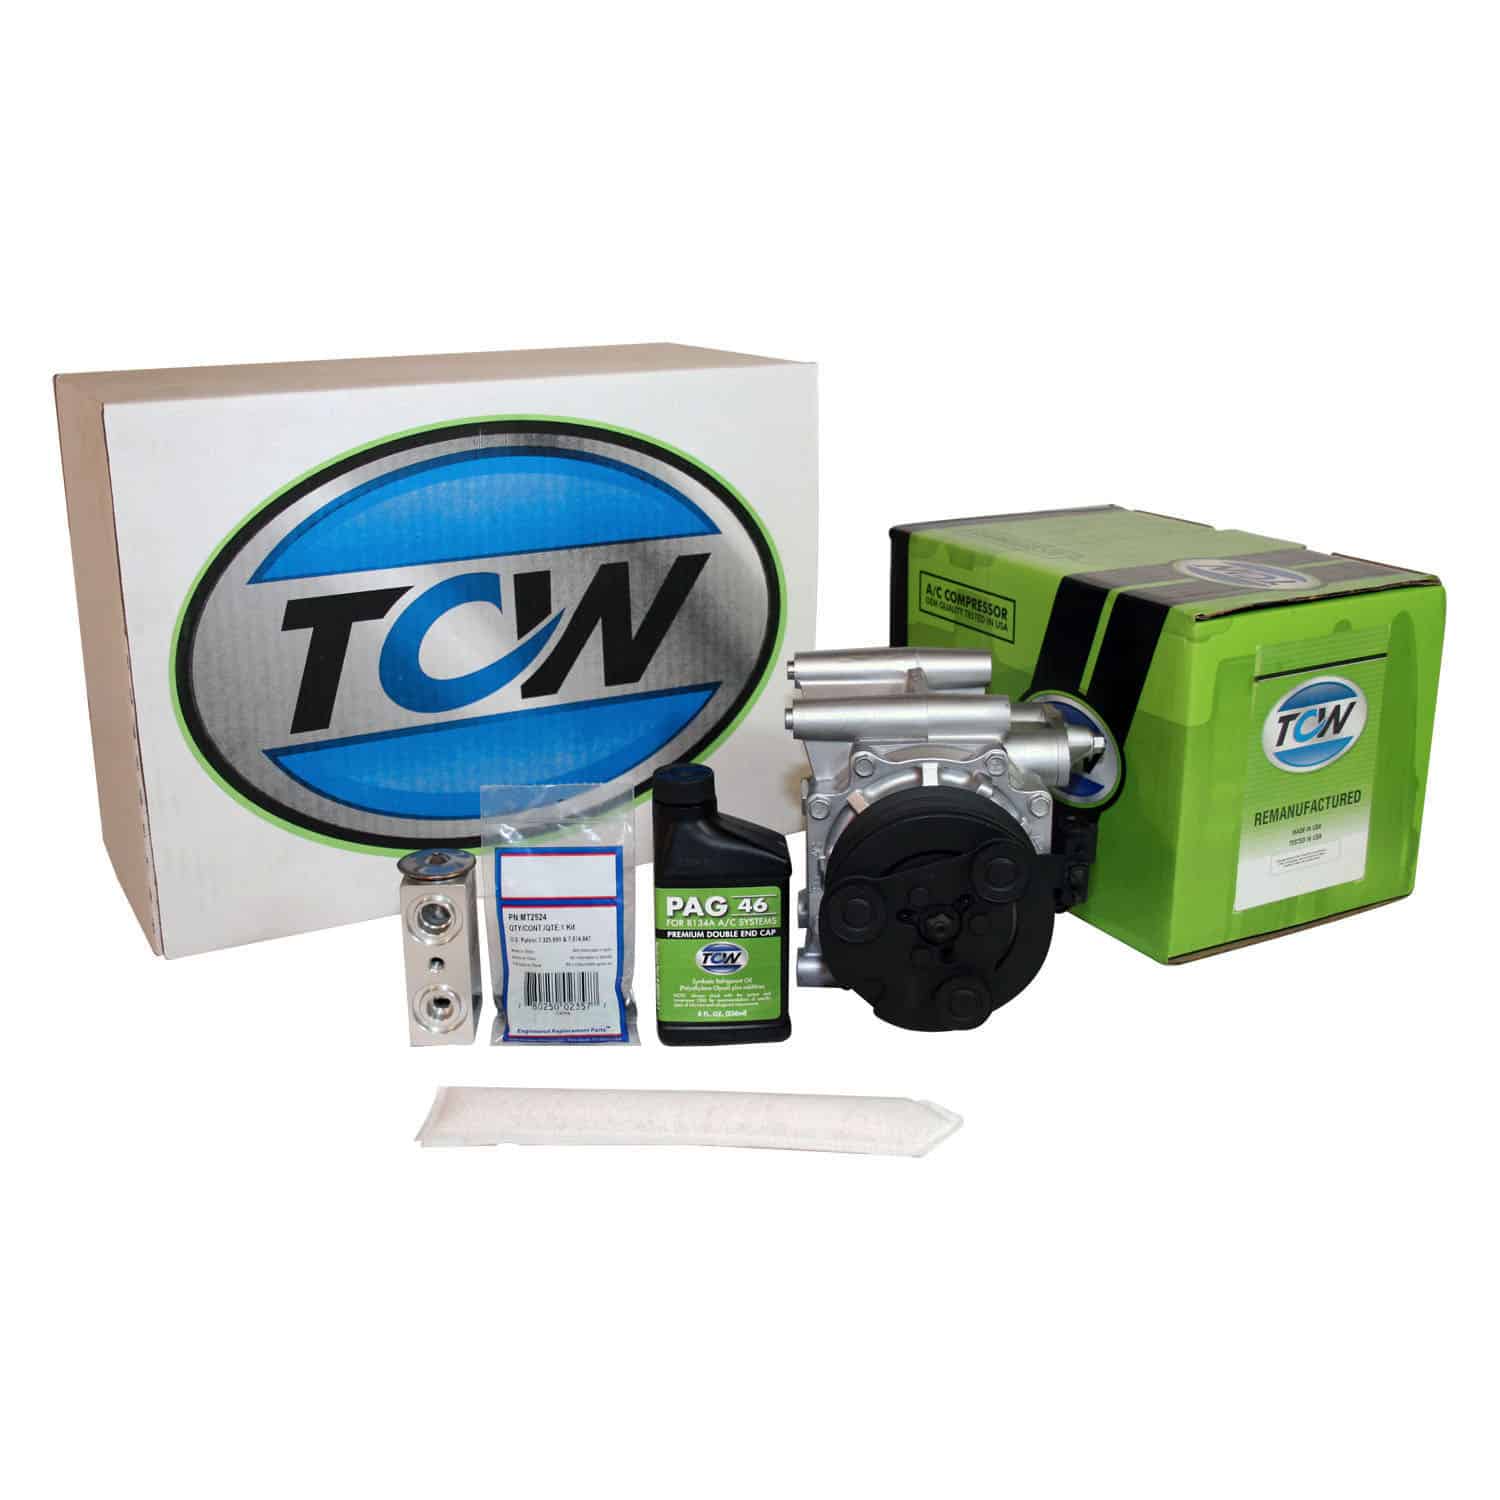 TCW Vehicle A/C Kit K1000249R Remanufactured